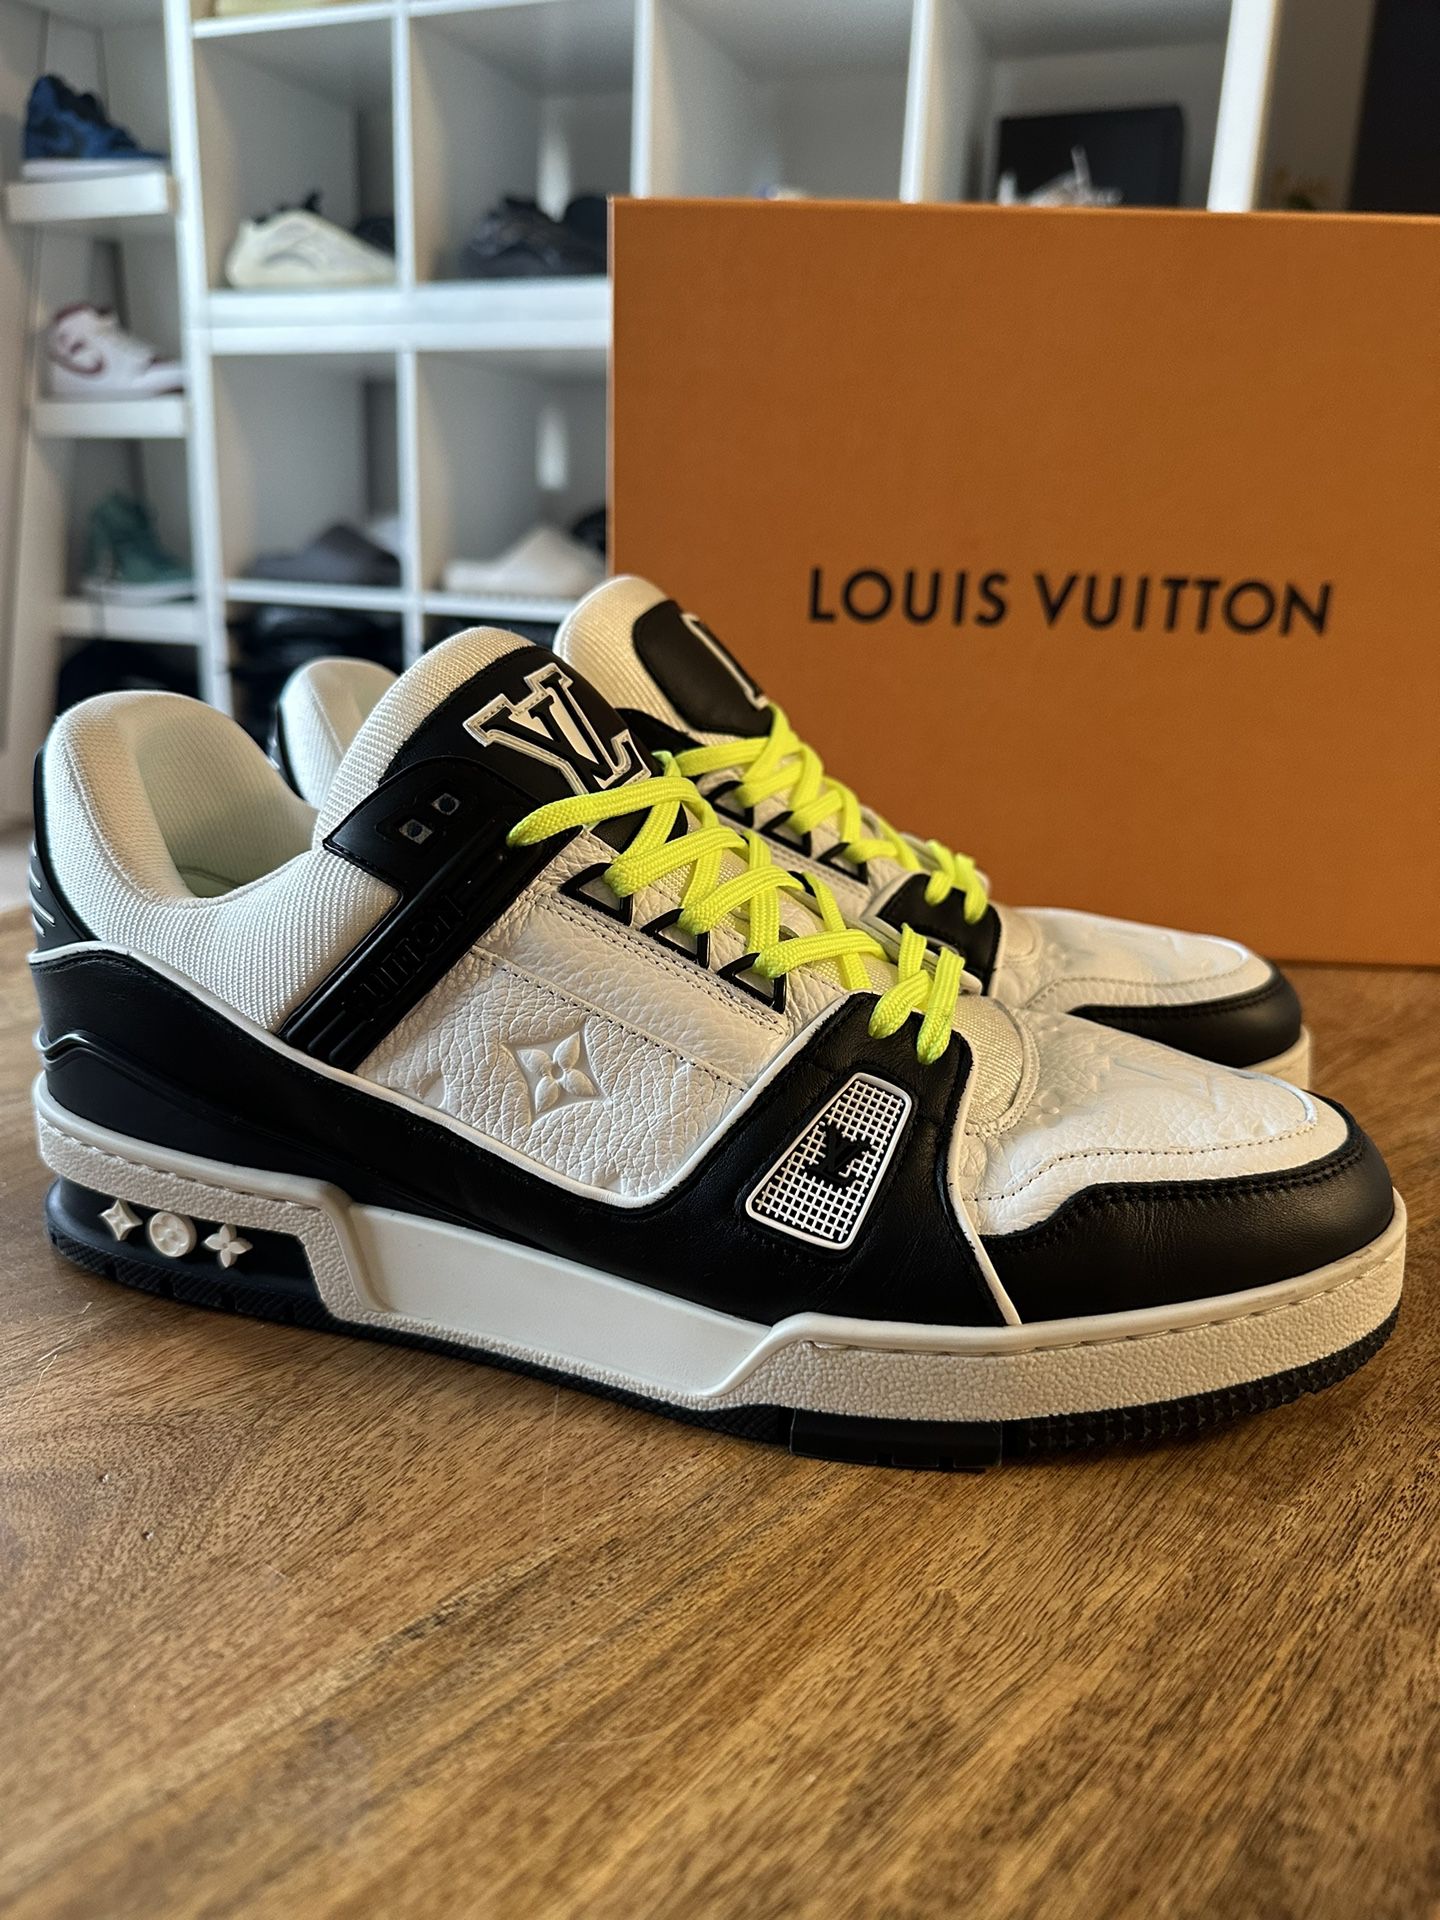 LV Sneakers Shoes Size 9.5 Men for Sale in Fort Lauderdale, FL - OfferUp